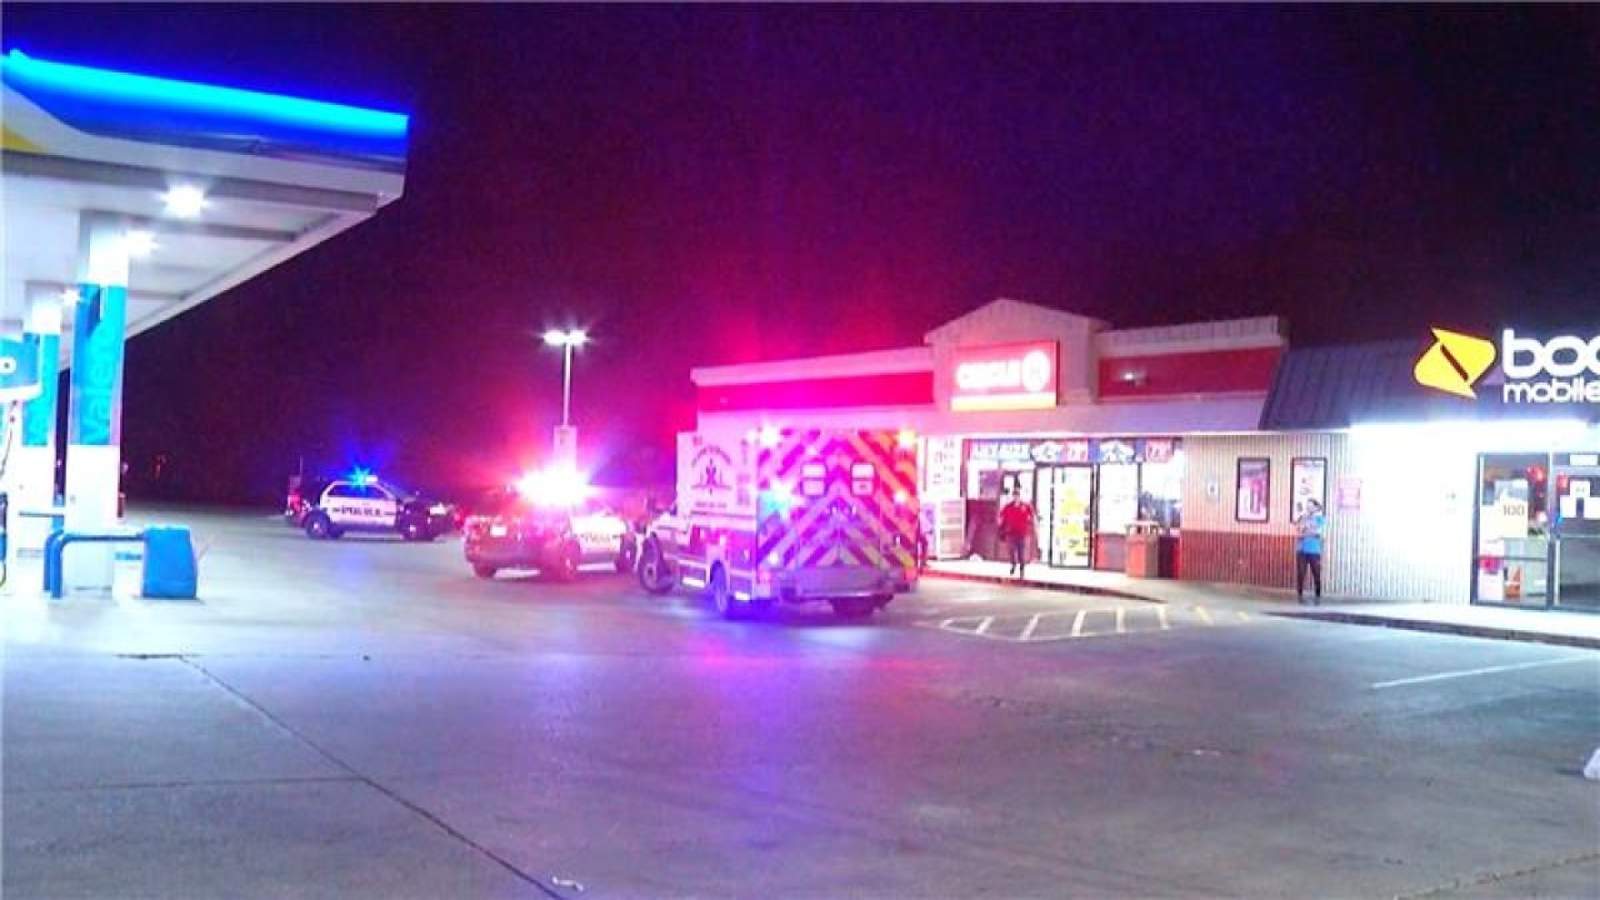 Man shot trying to break up altercation at North Side gas station, police say